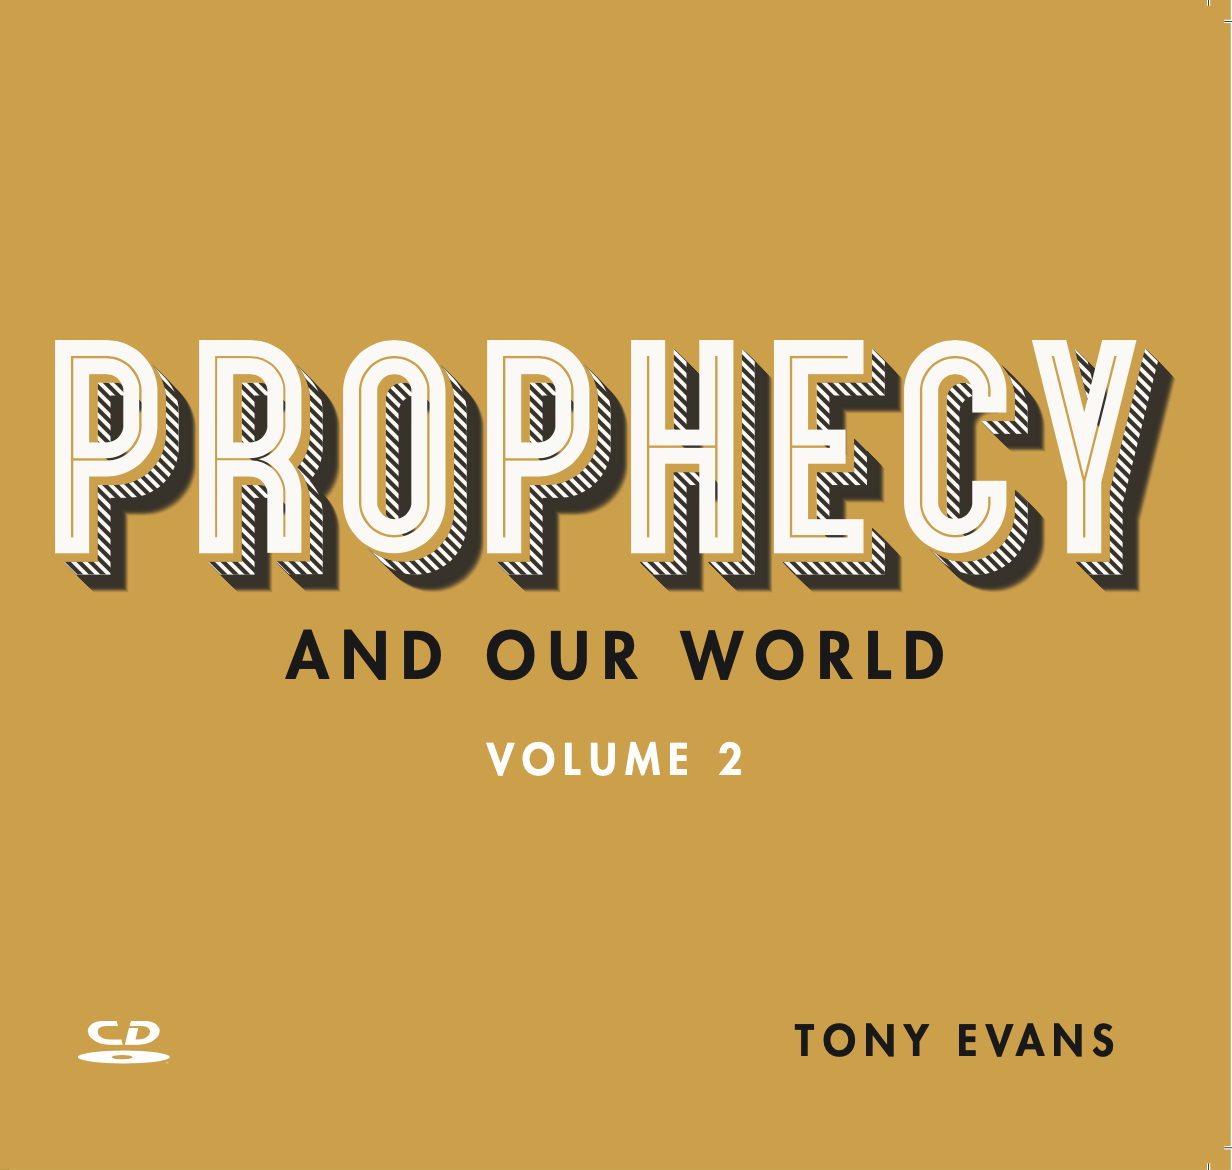 Prophecy and Our World Vol 2 - CD Series